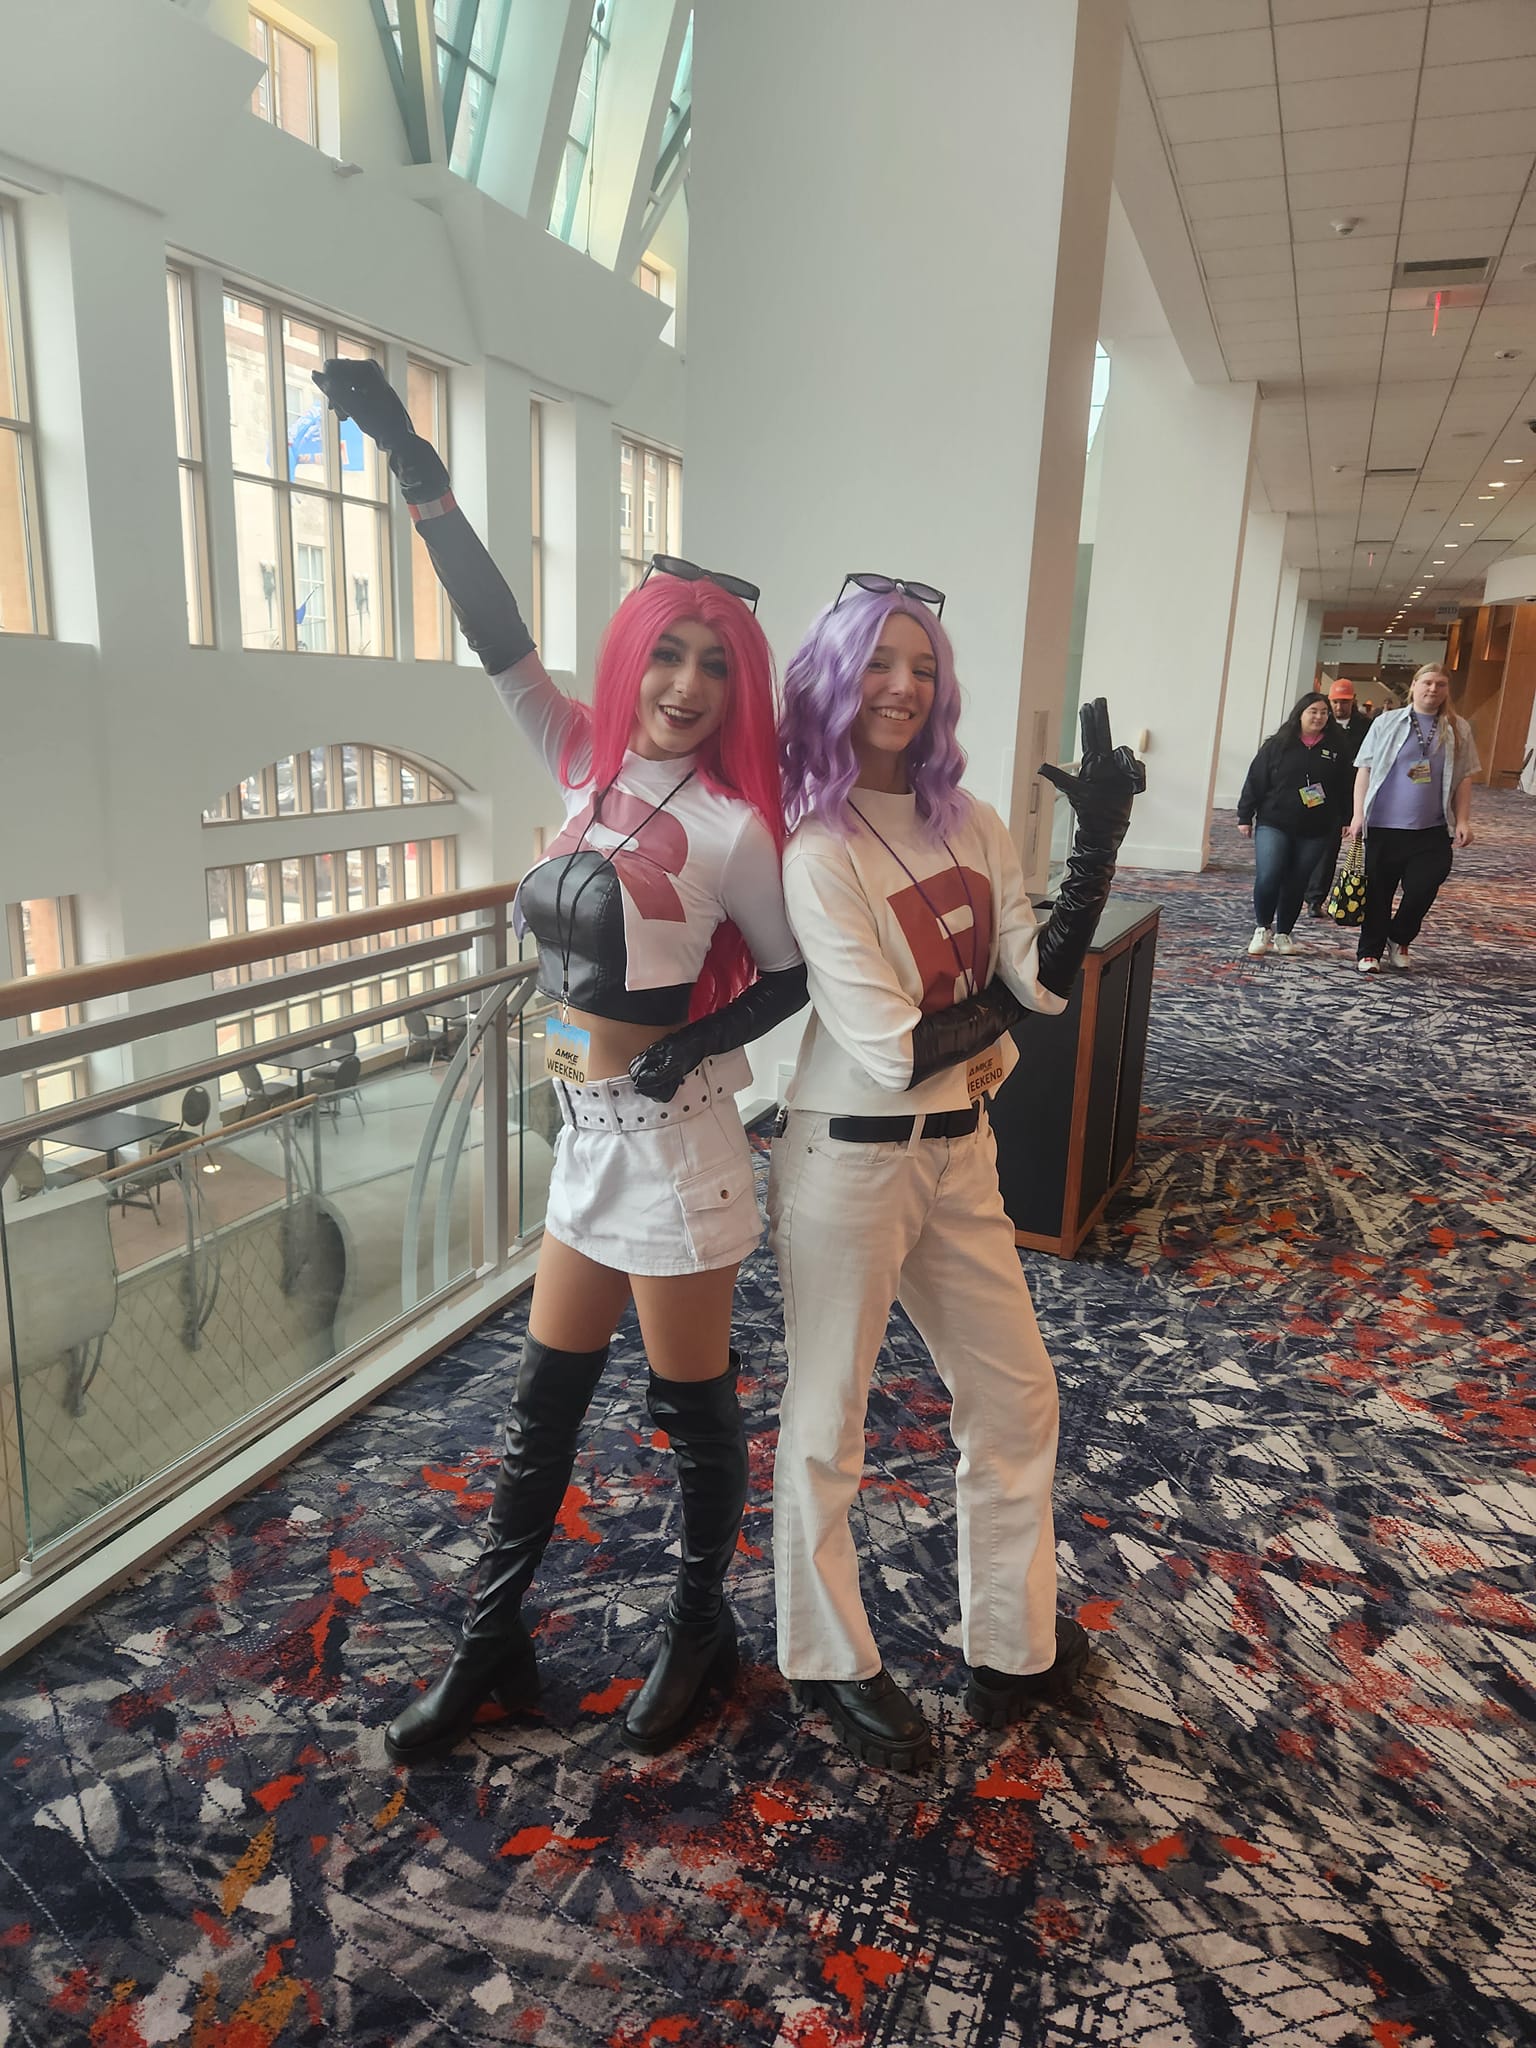 What to Expect at Anime MKE This Weekend